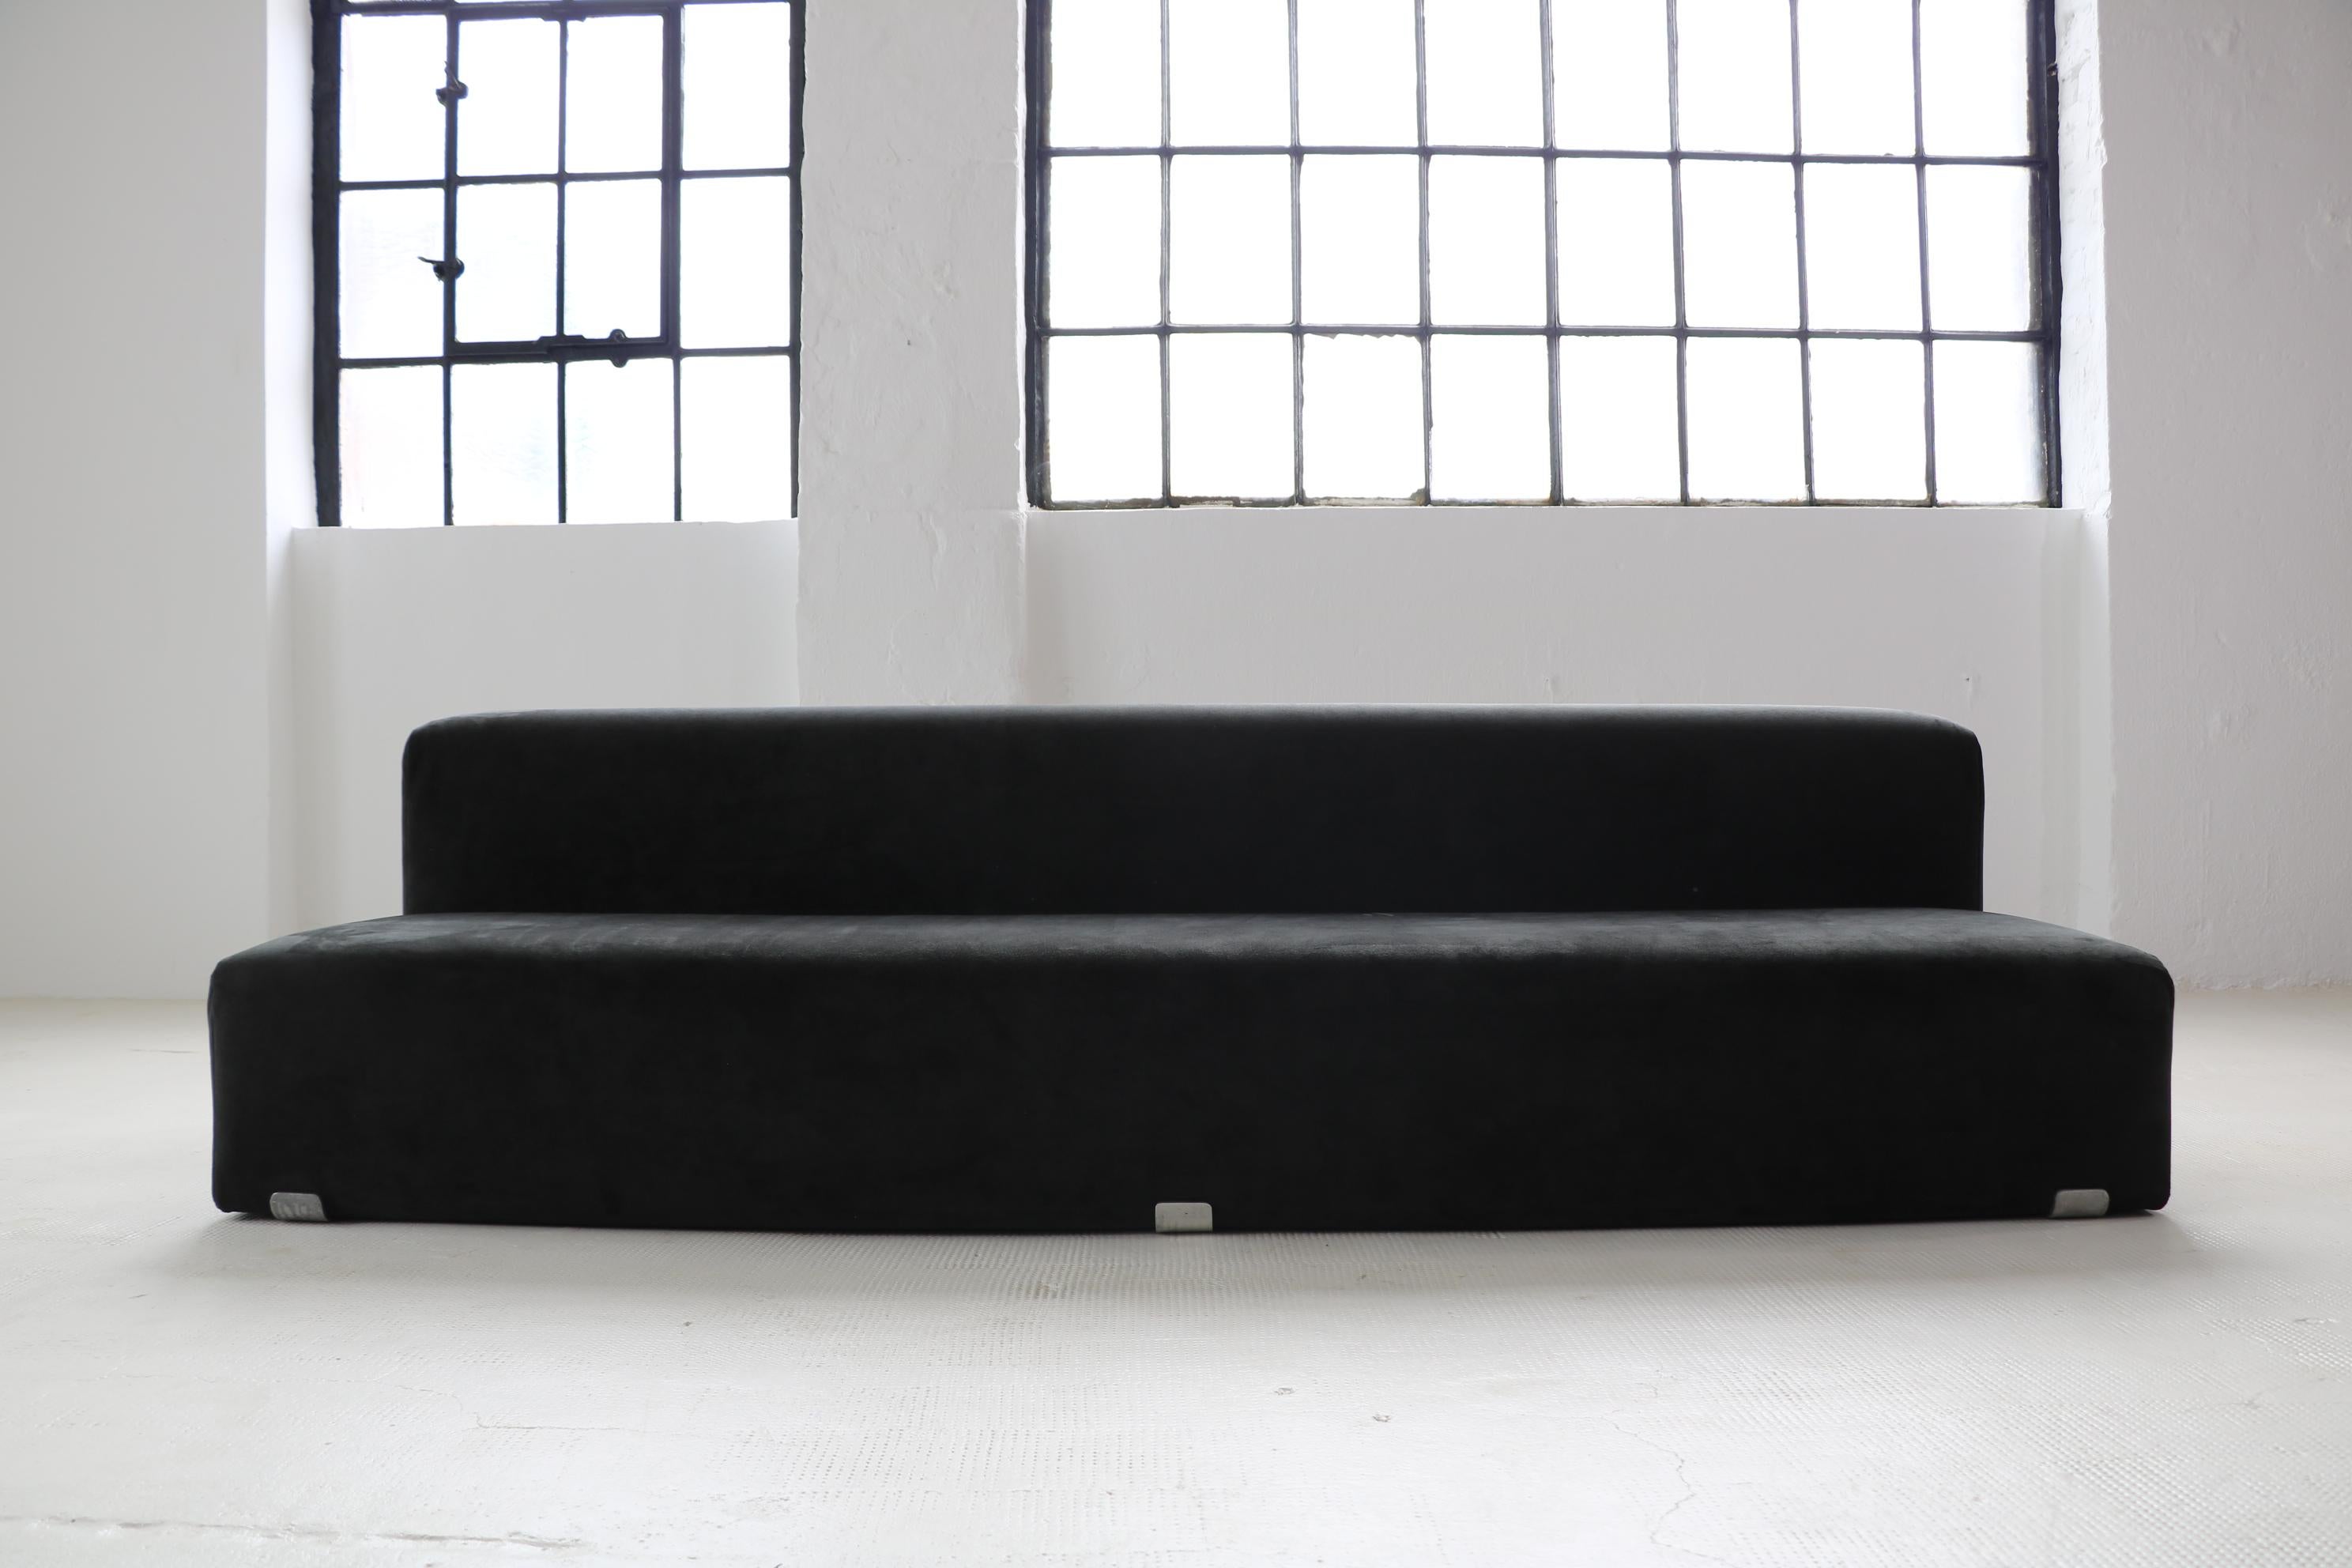 Kazuhide Takahama 3-seater sofa produced by Gavina in 1980.
Price is for the sofa. You will find the armchair in another auction.